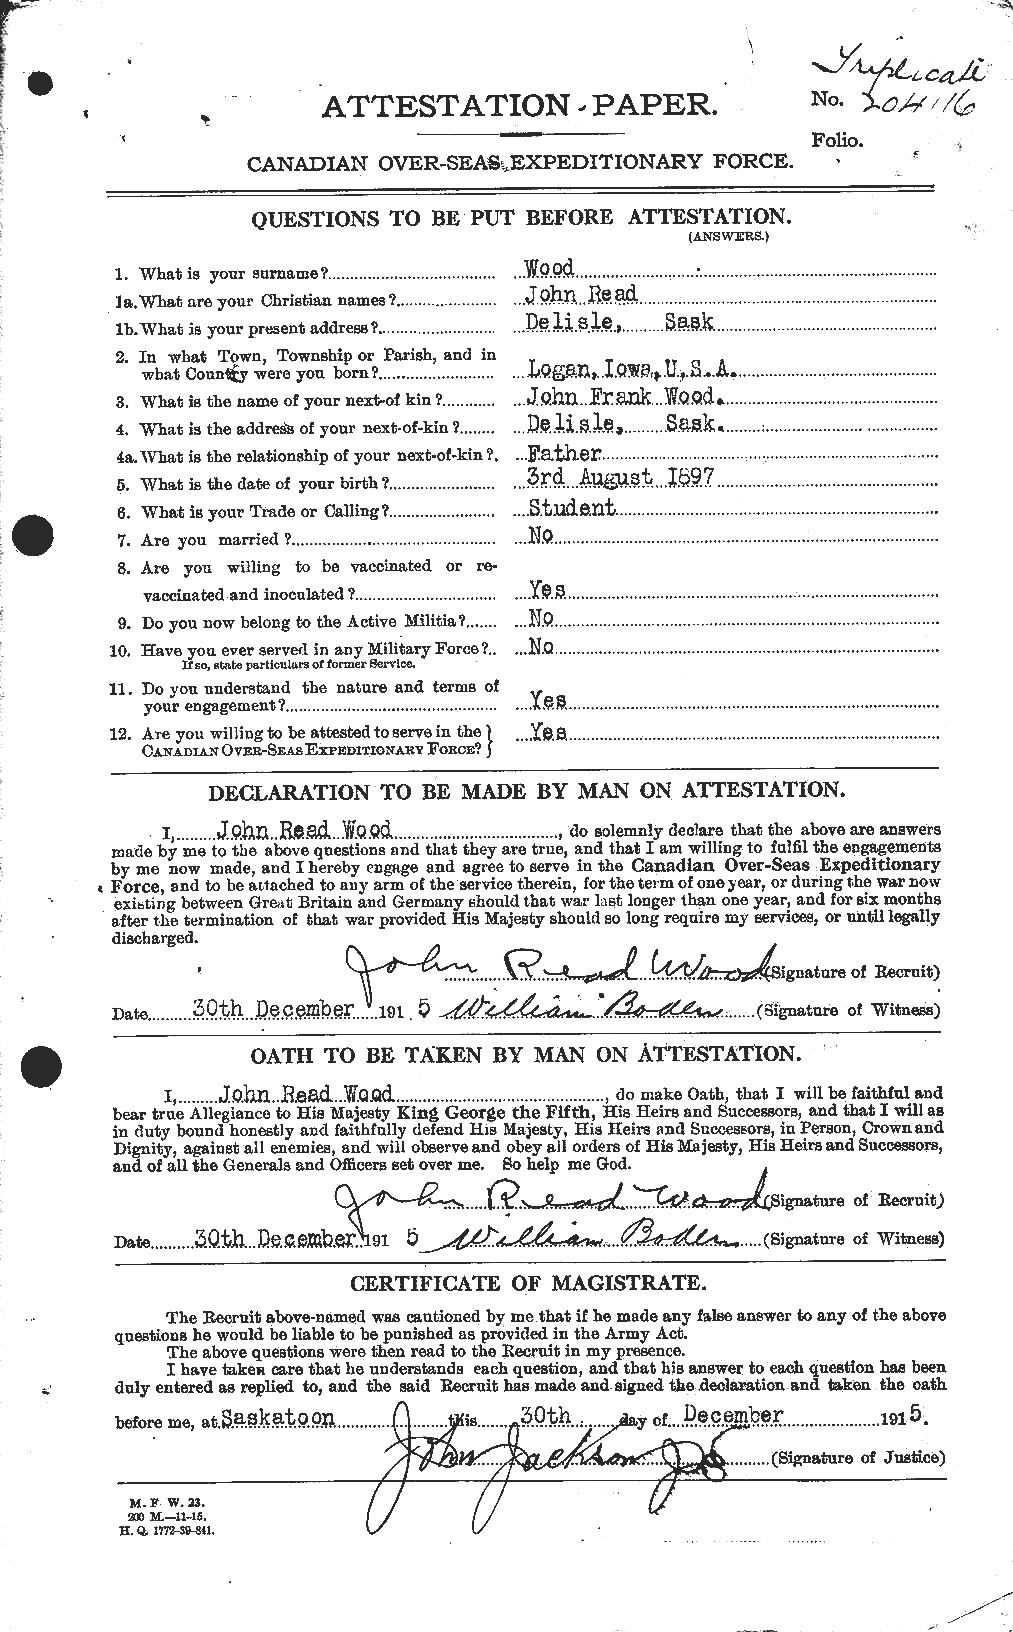 Personnel Records of the First World War - CEF 684598a